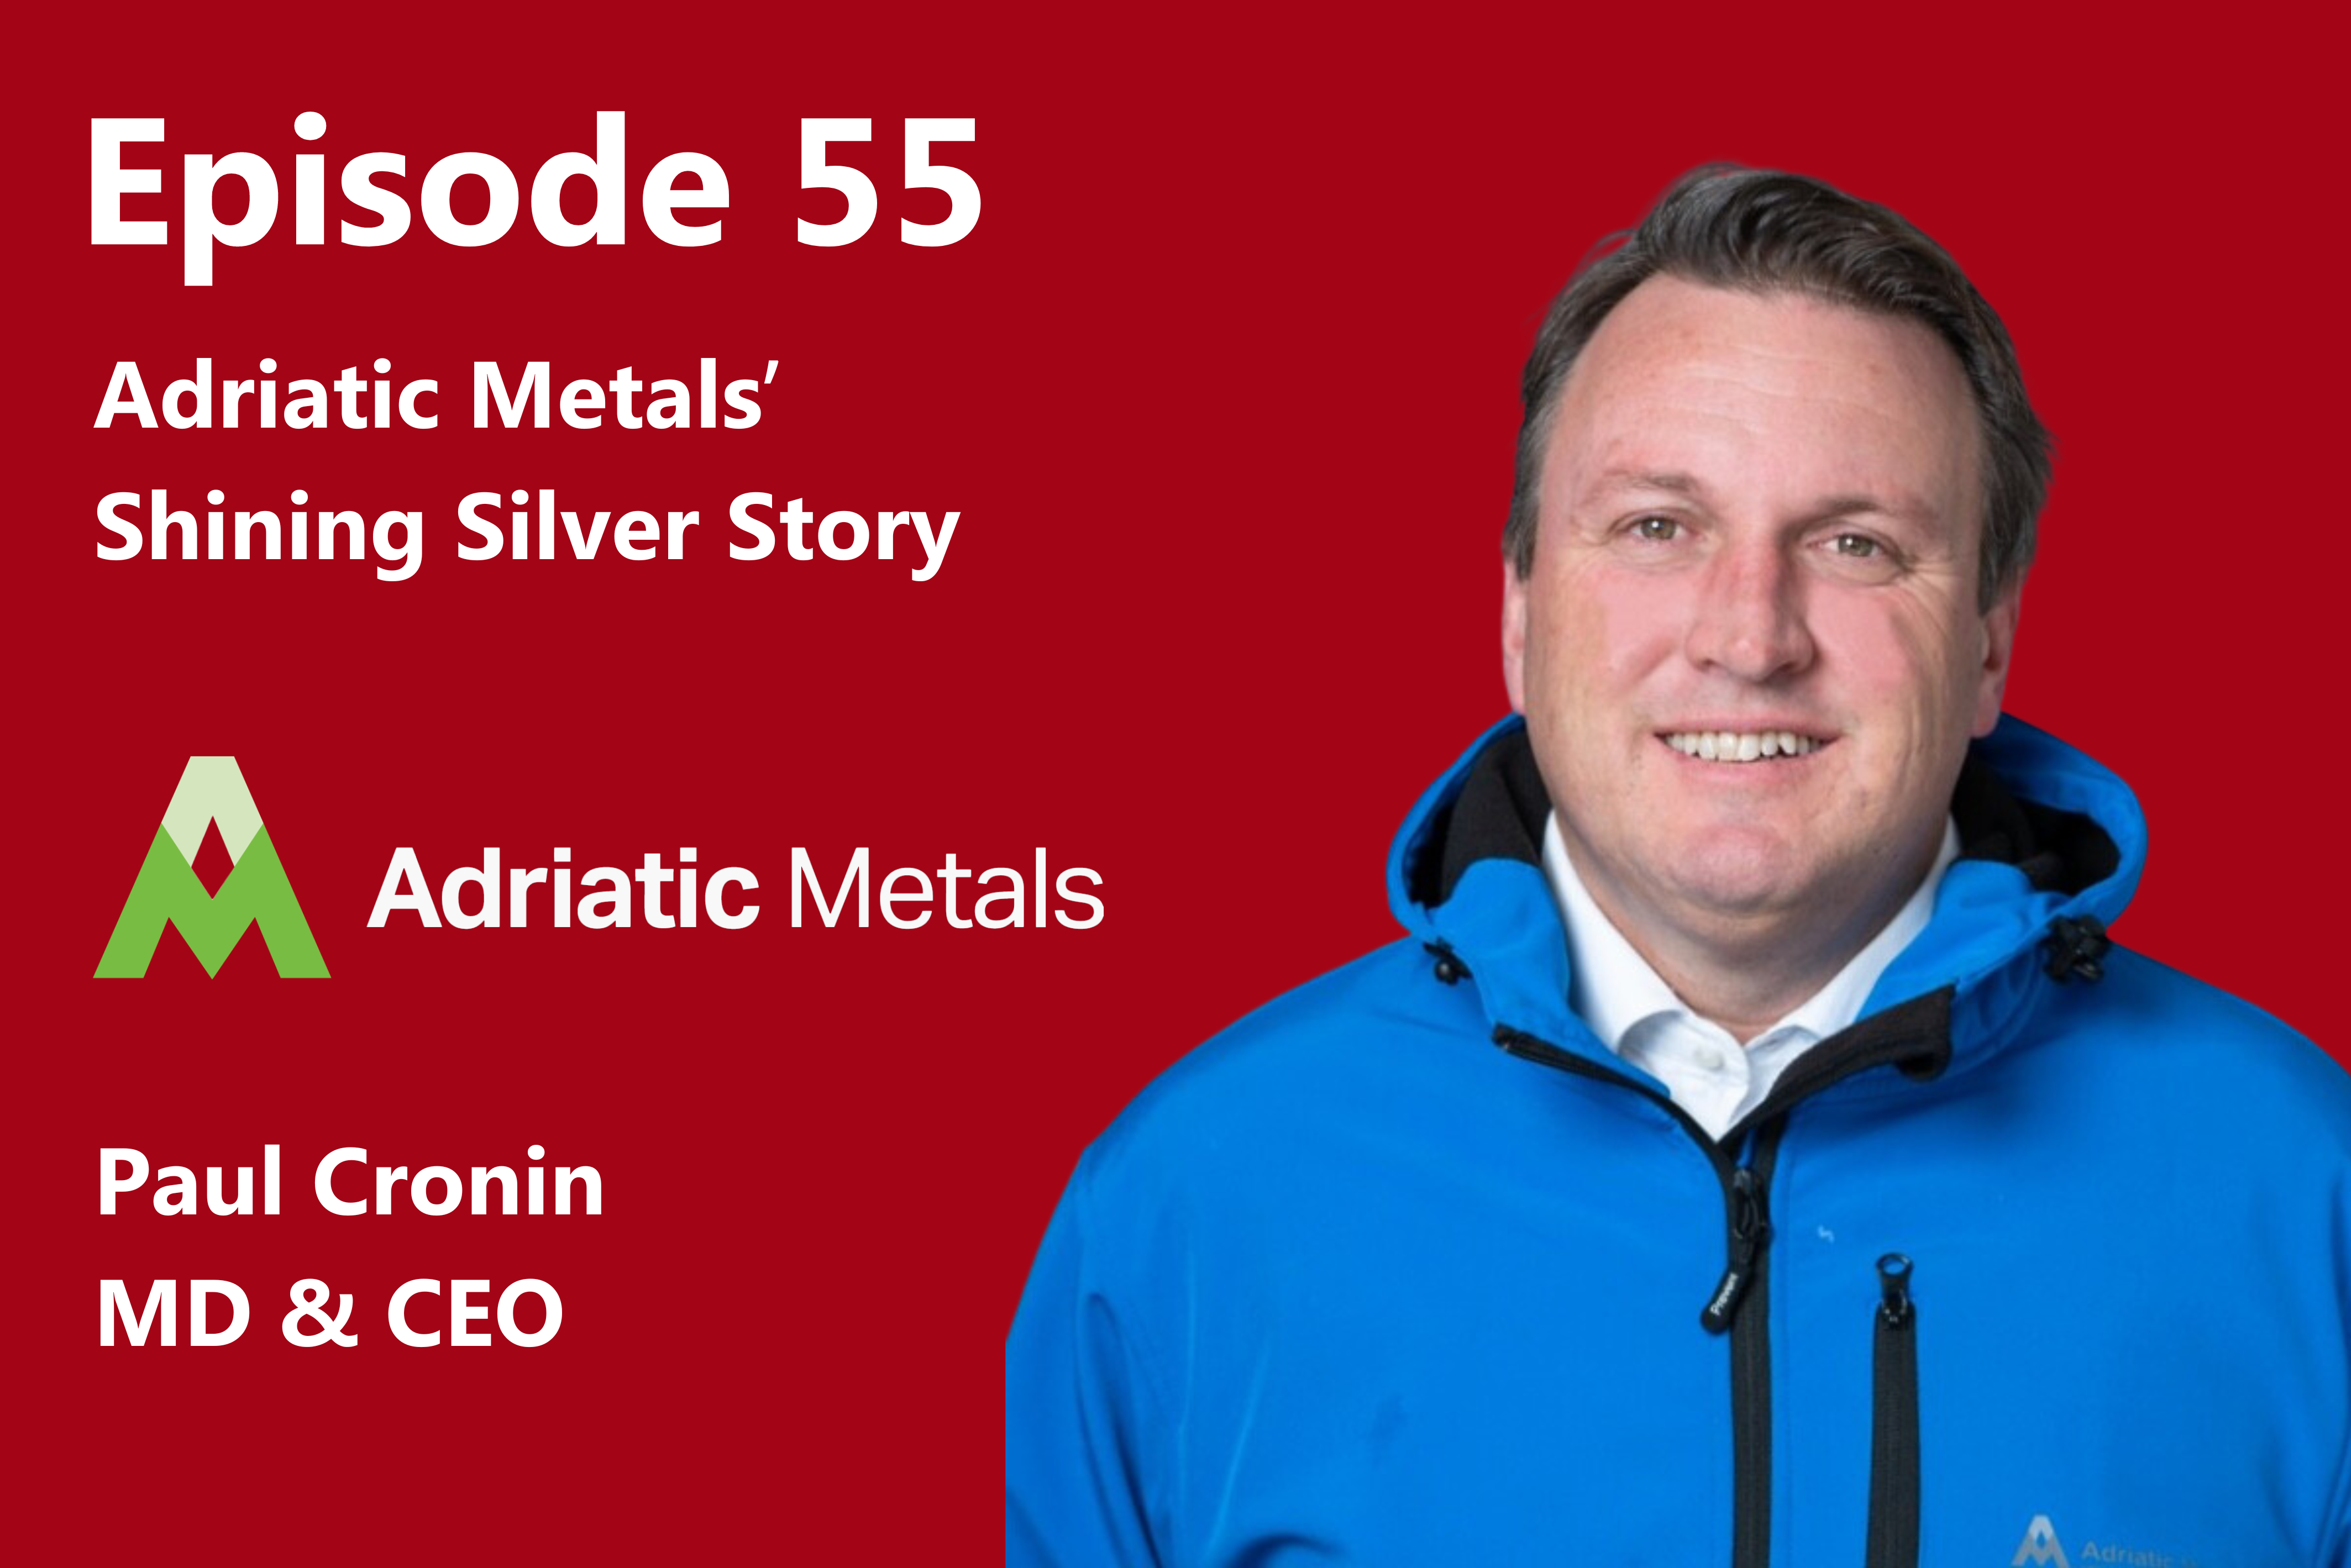 Episode 55: Adriatic Metals' Shining Silver Story with Paul Cronin